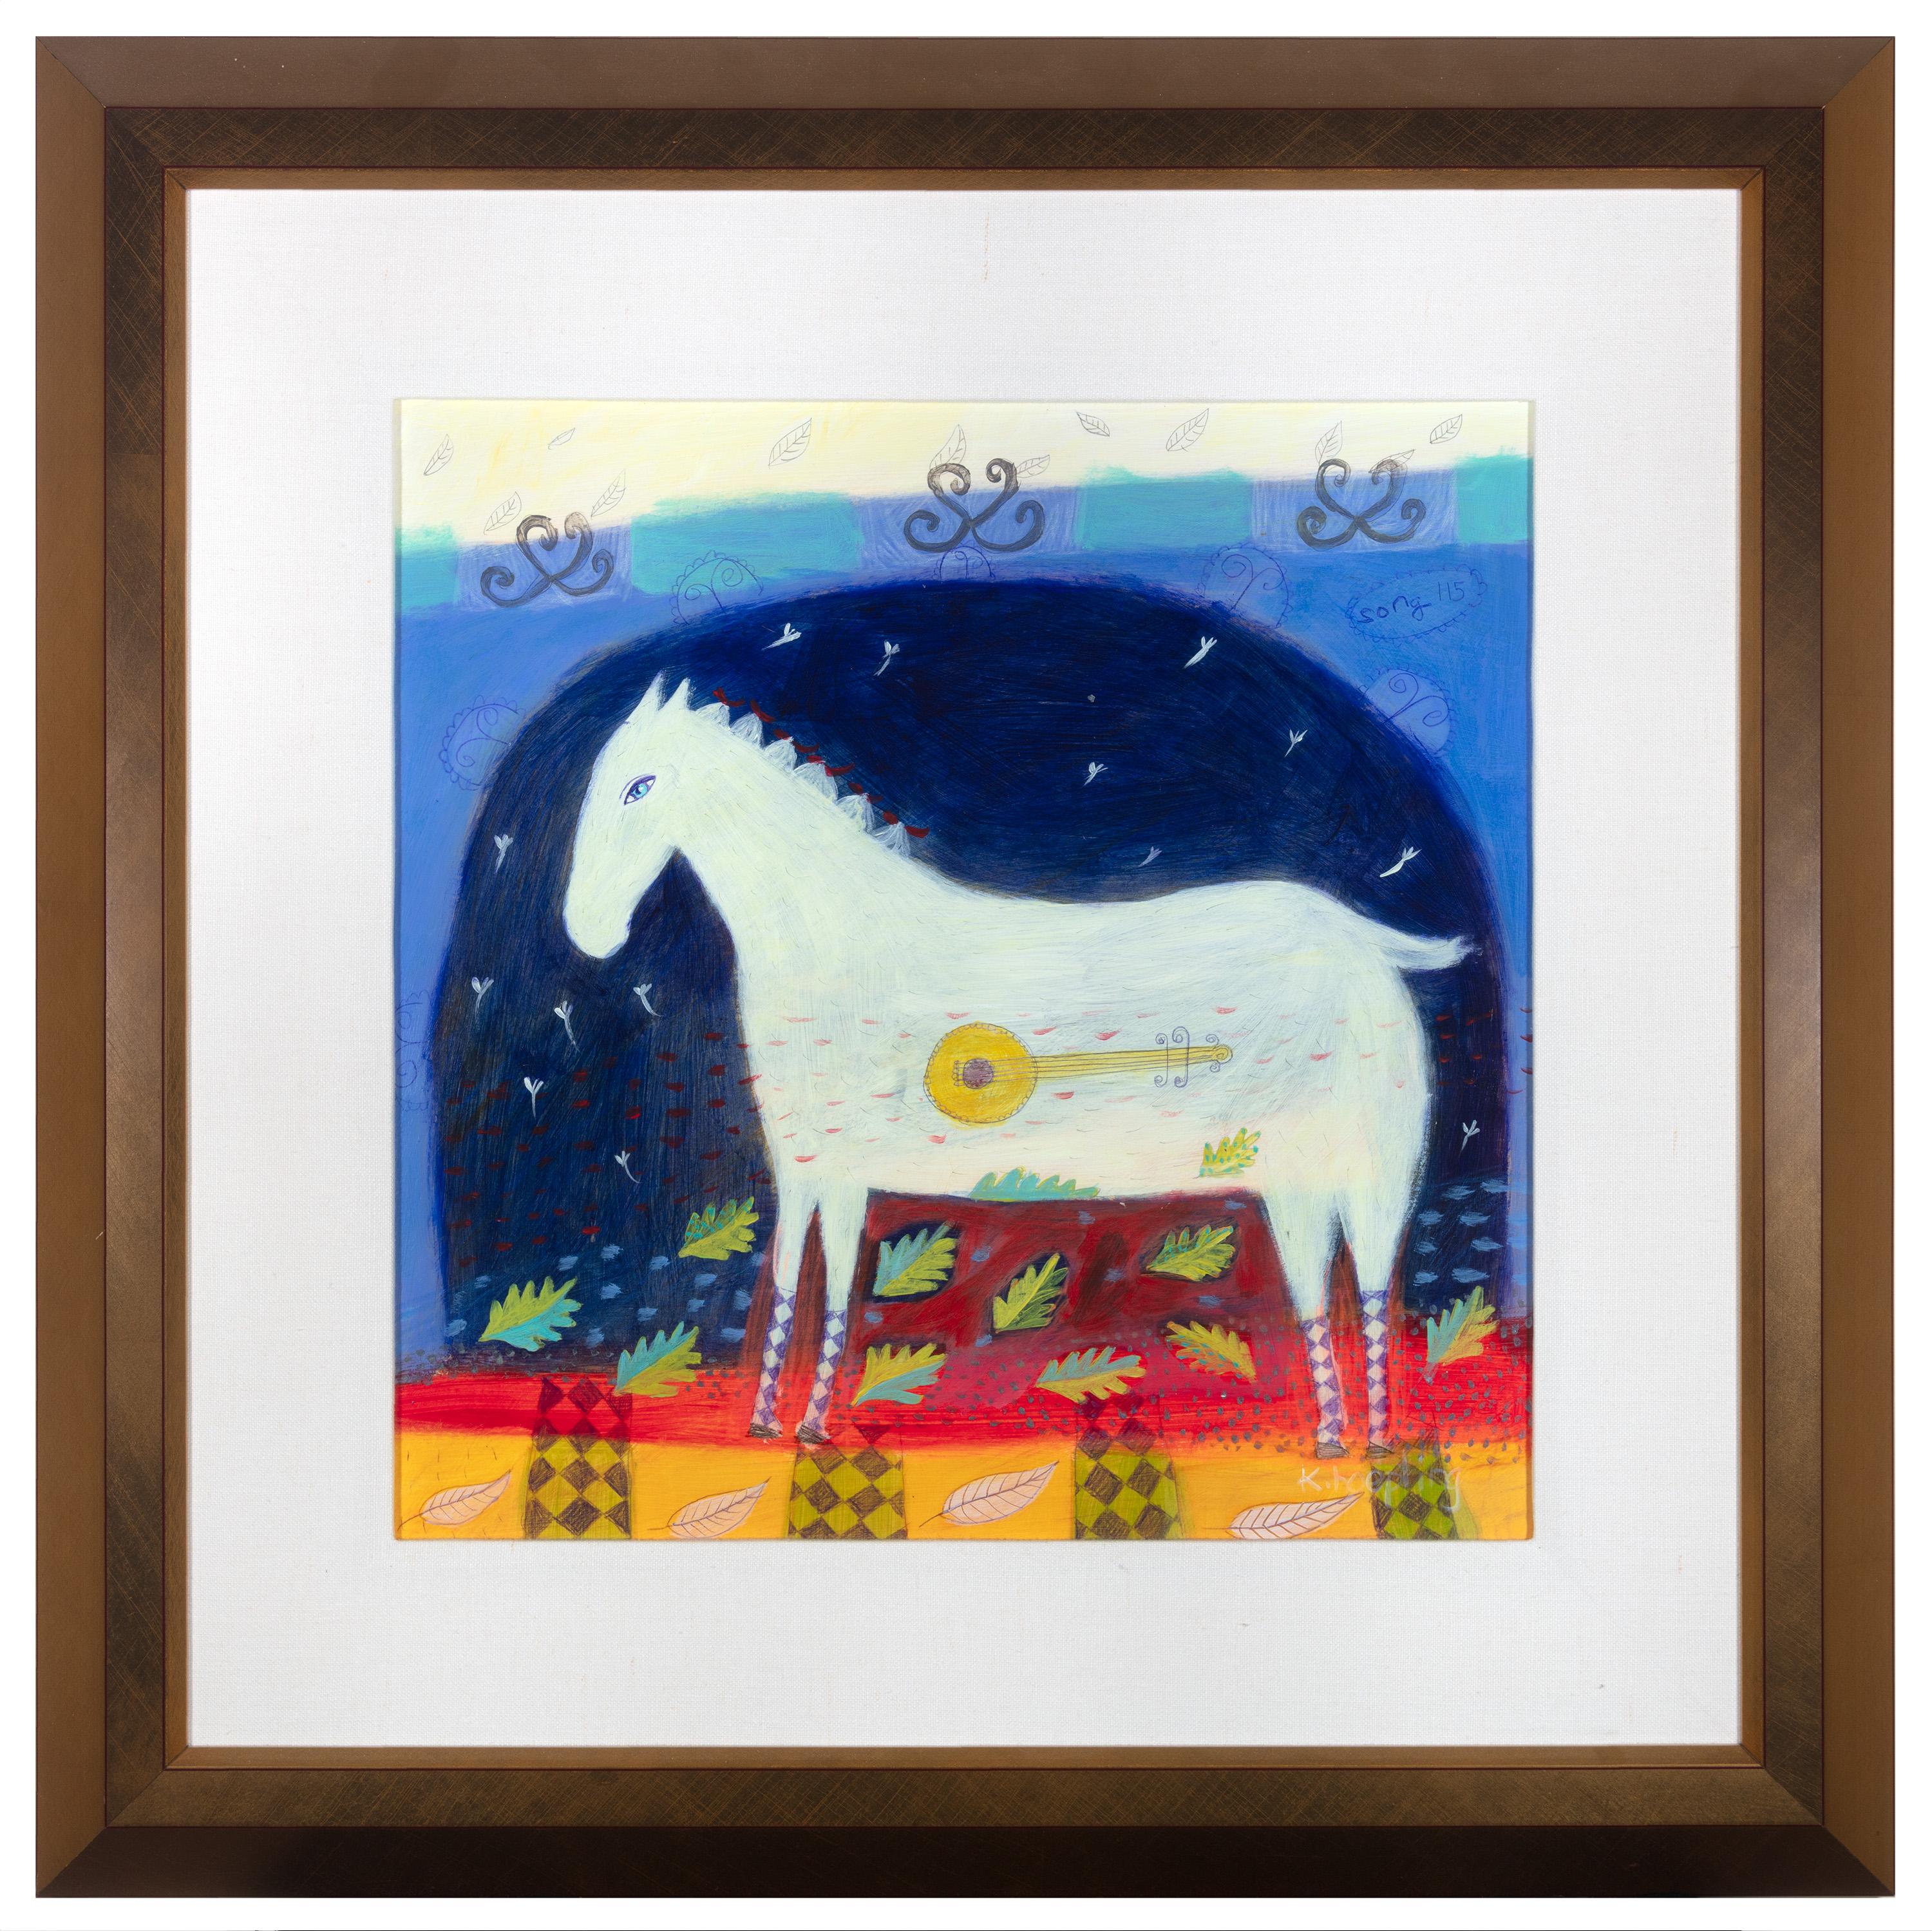 "Song 115" Acrylic on Paper Expressionist Horse & Bango signed by Karen Hopeting